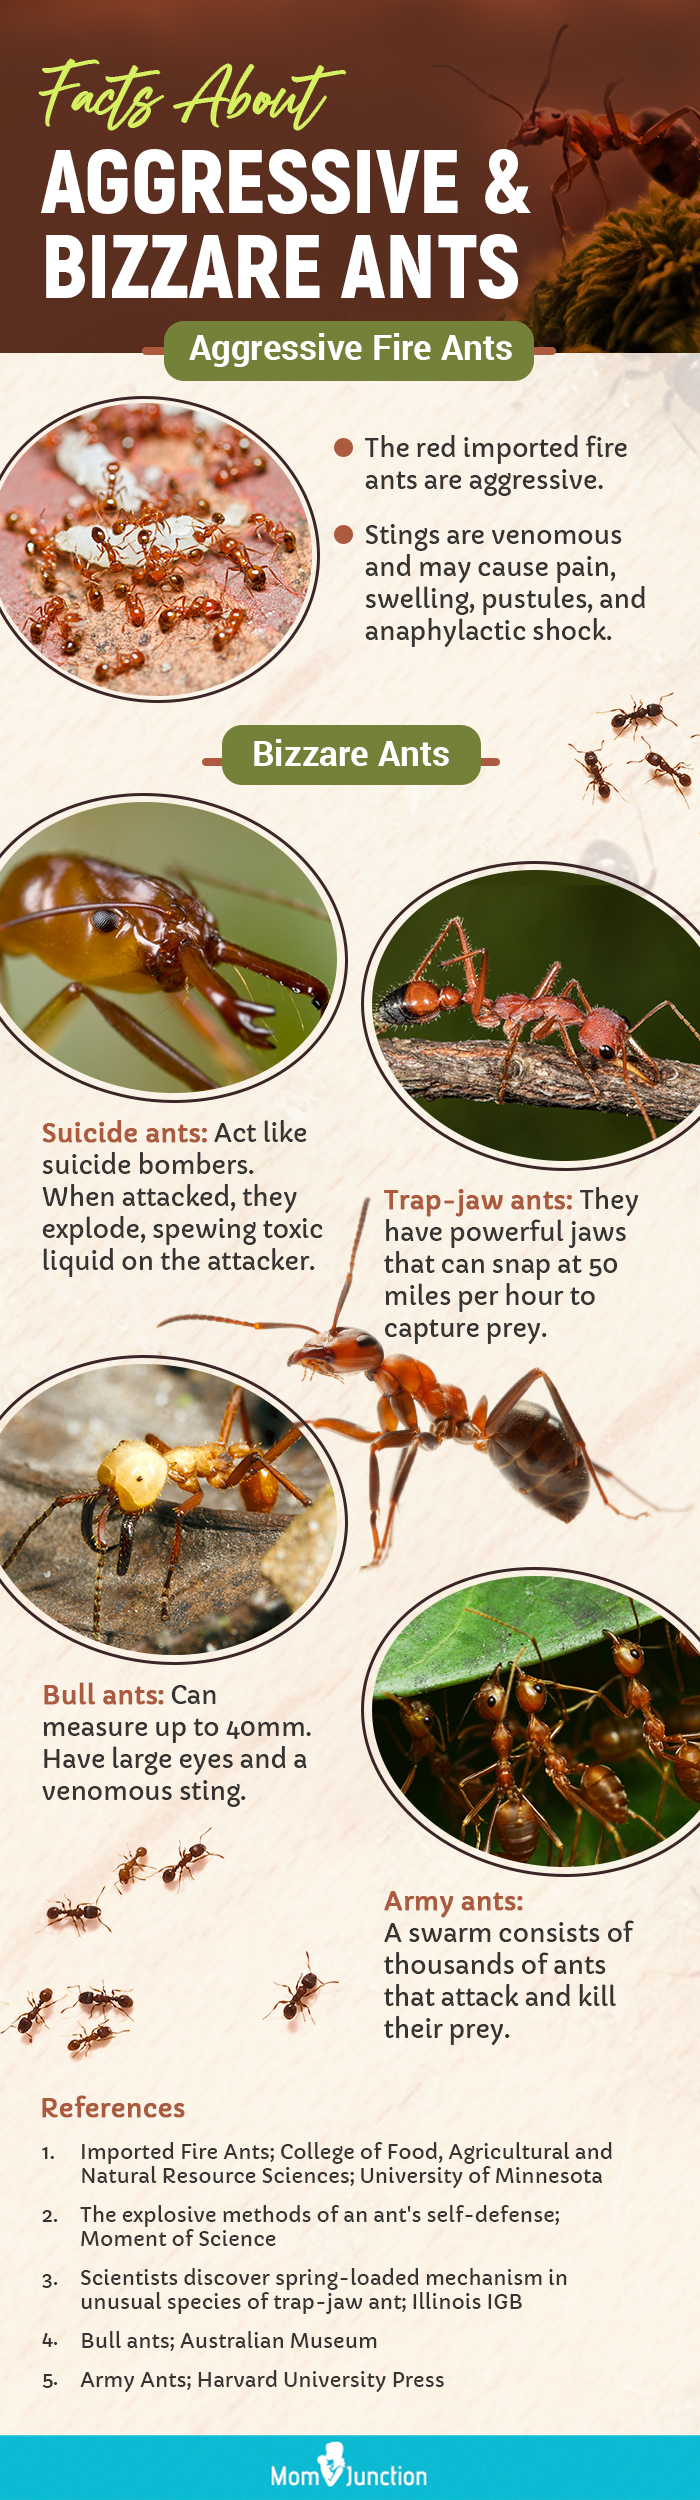 facts about aggressive and bizzare ants [infographic]